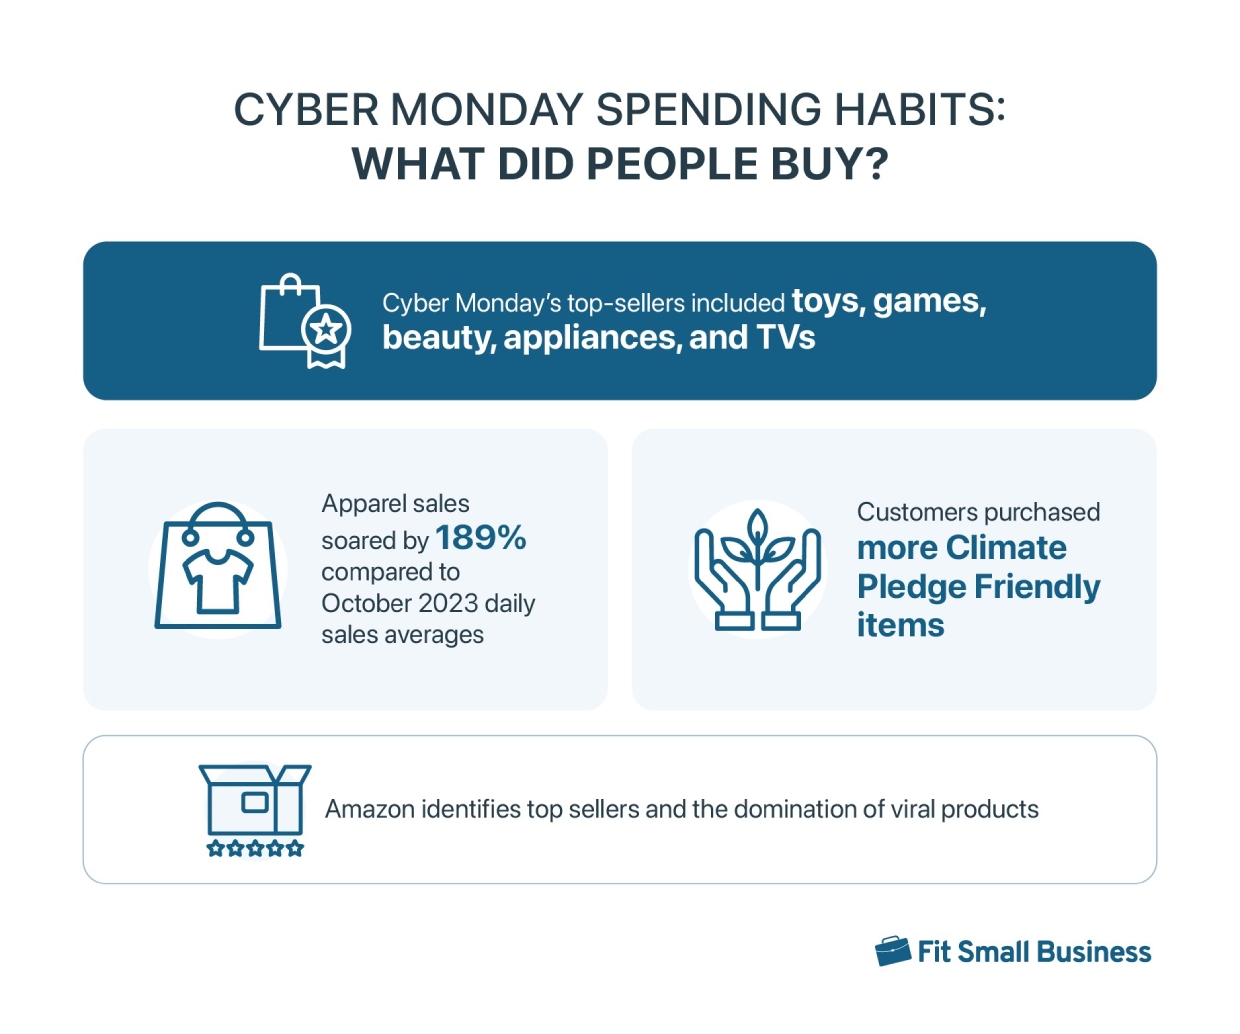 Composite graphic featuring consumer spending habits and top sellers on Cyber Monday.